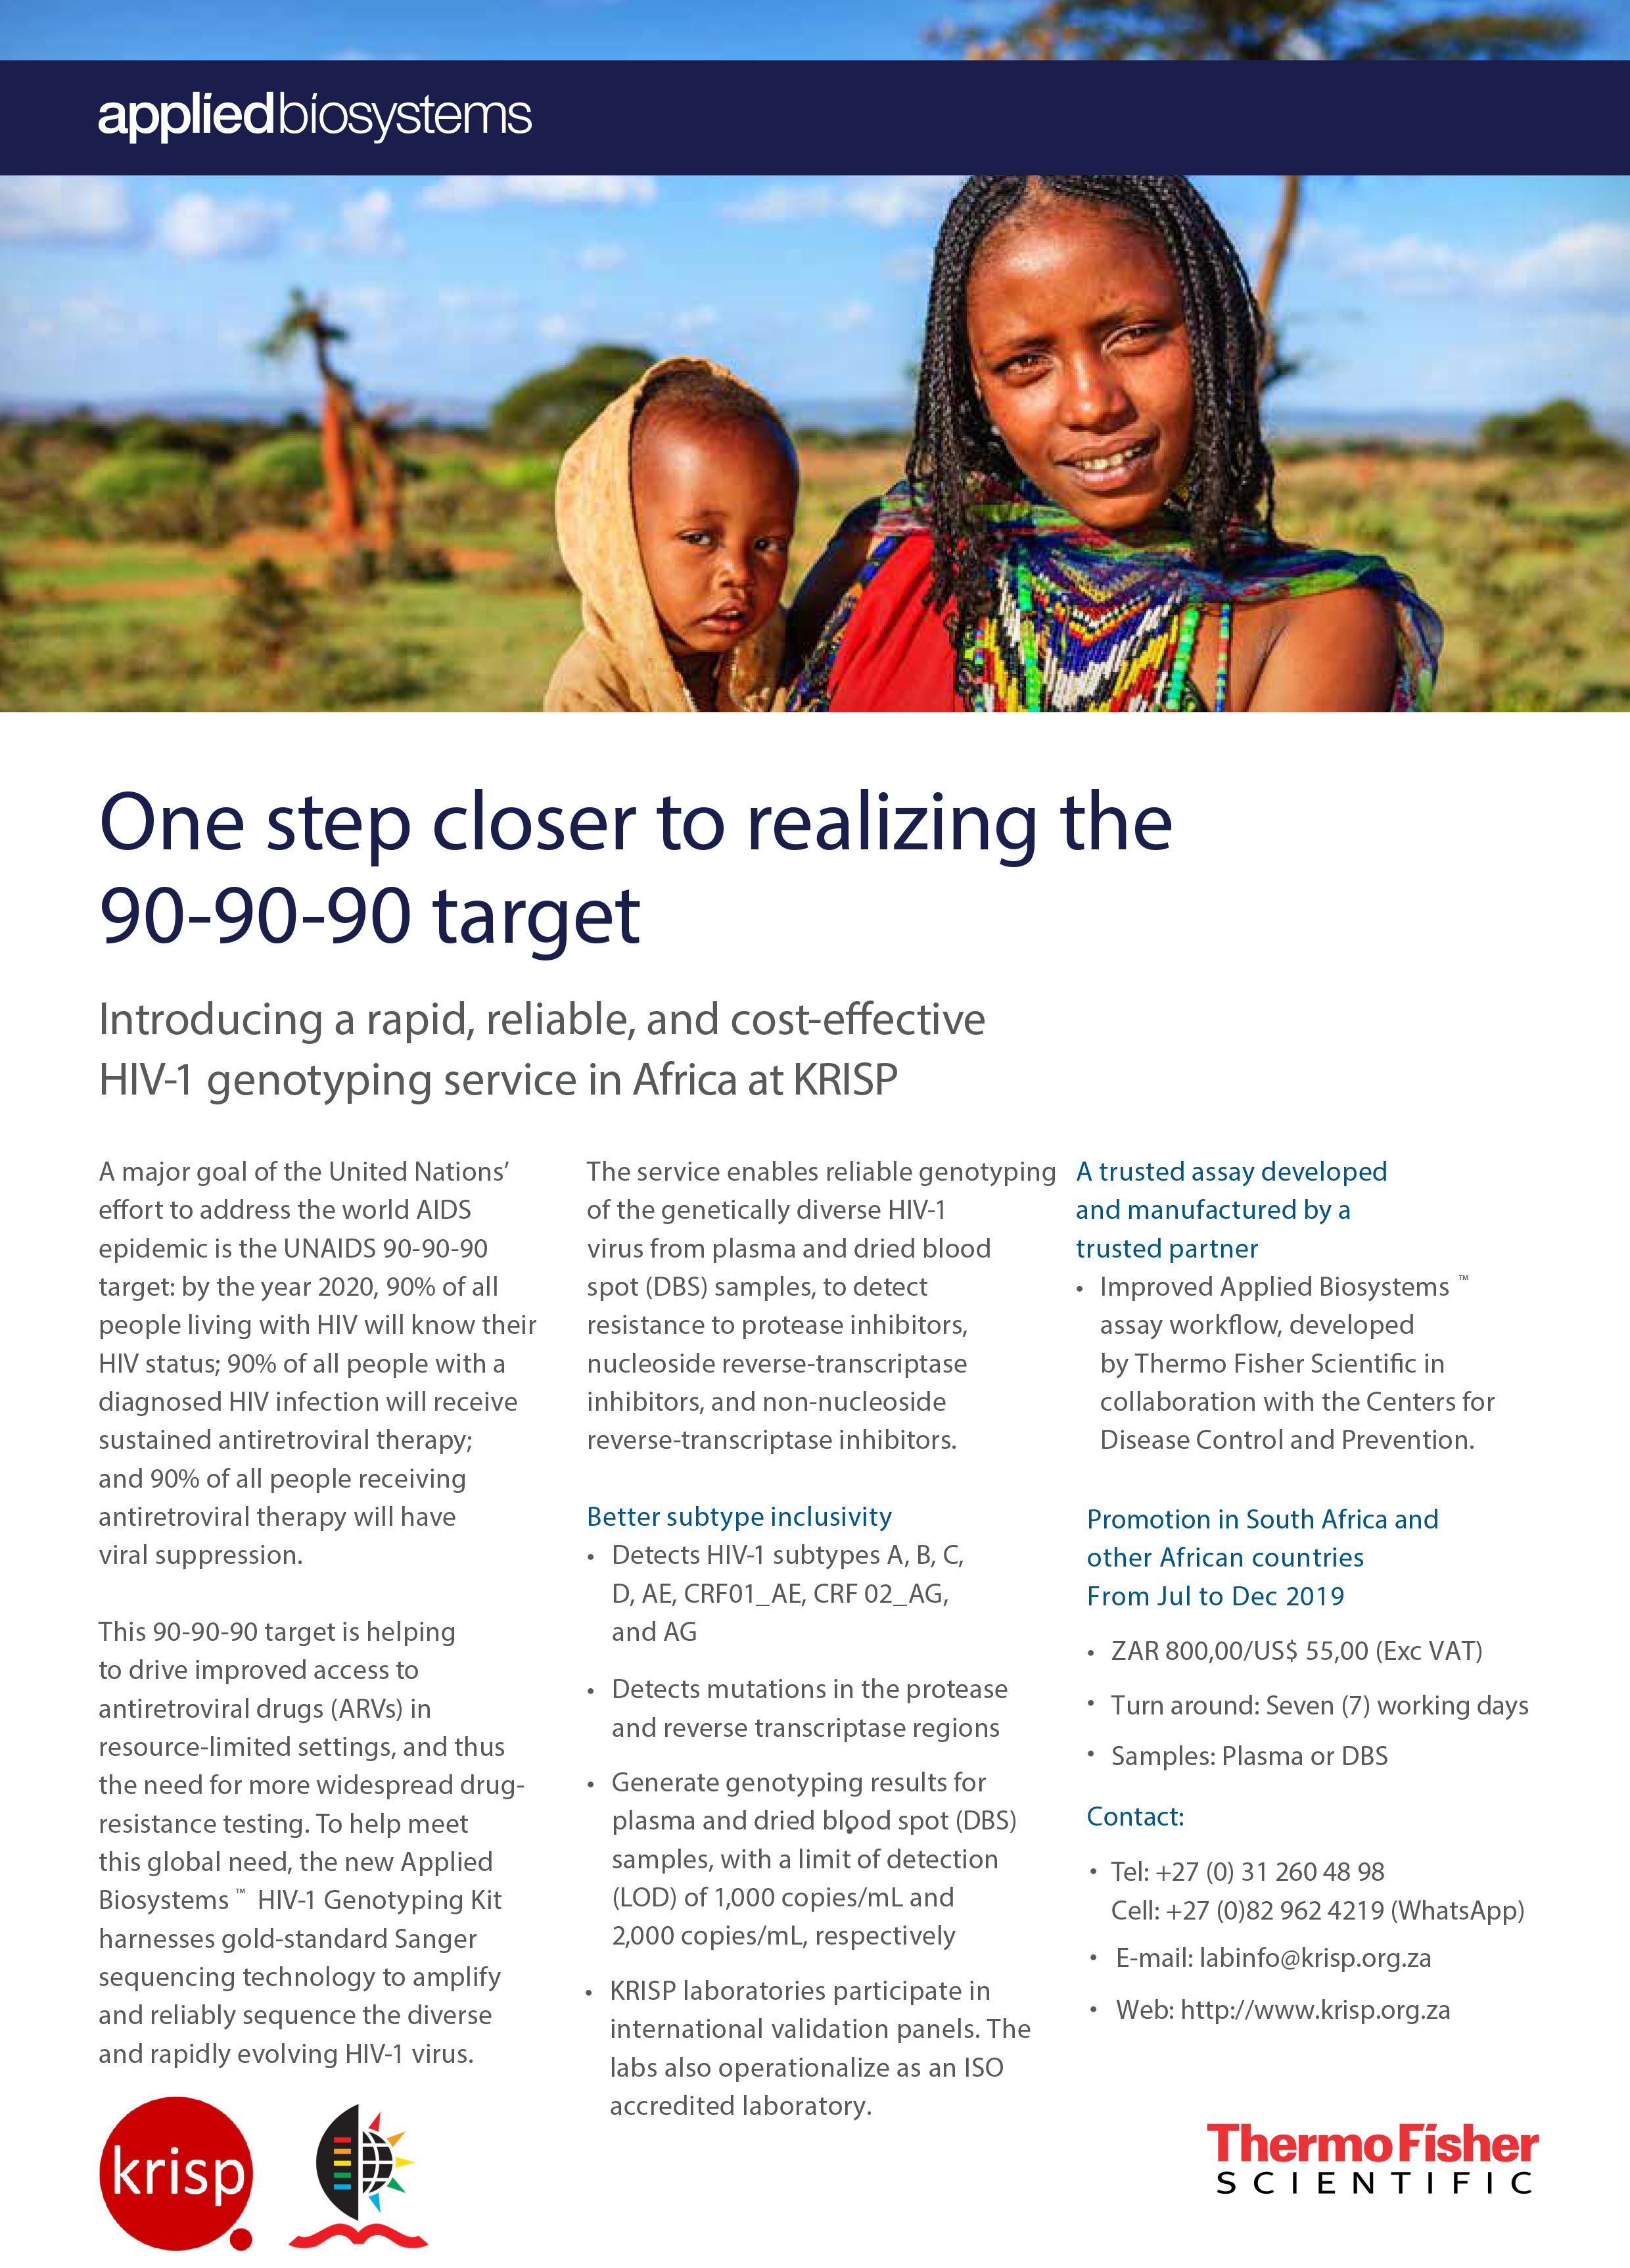 HIV-1 genotyping service in Africa: rapid, reliable, and cost-effective by KRISP and Thermo Fisher Scientific